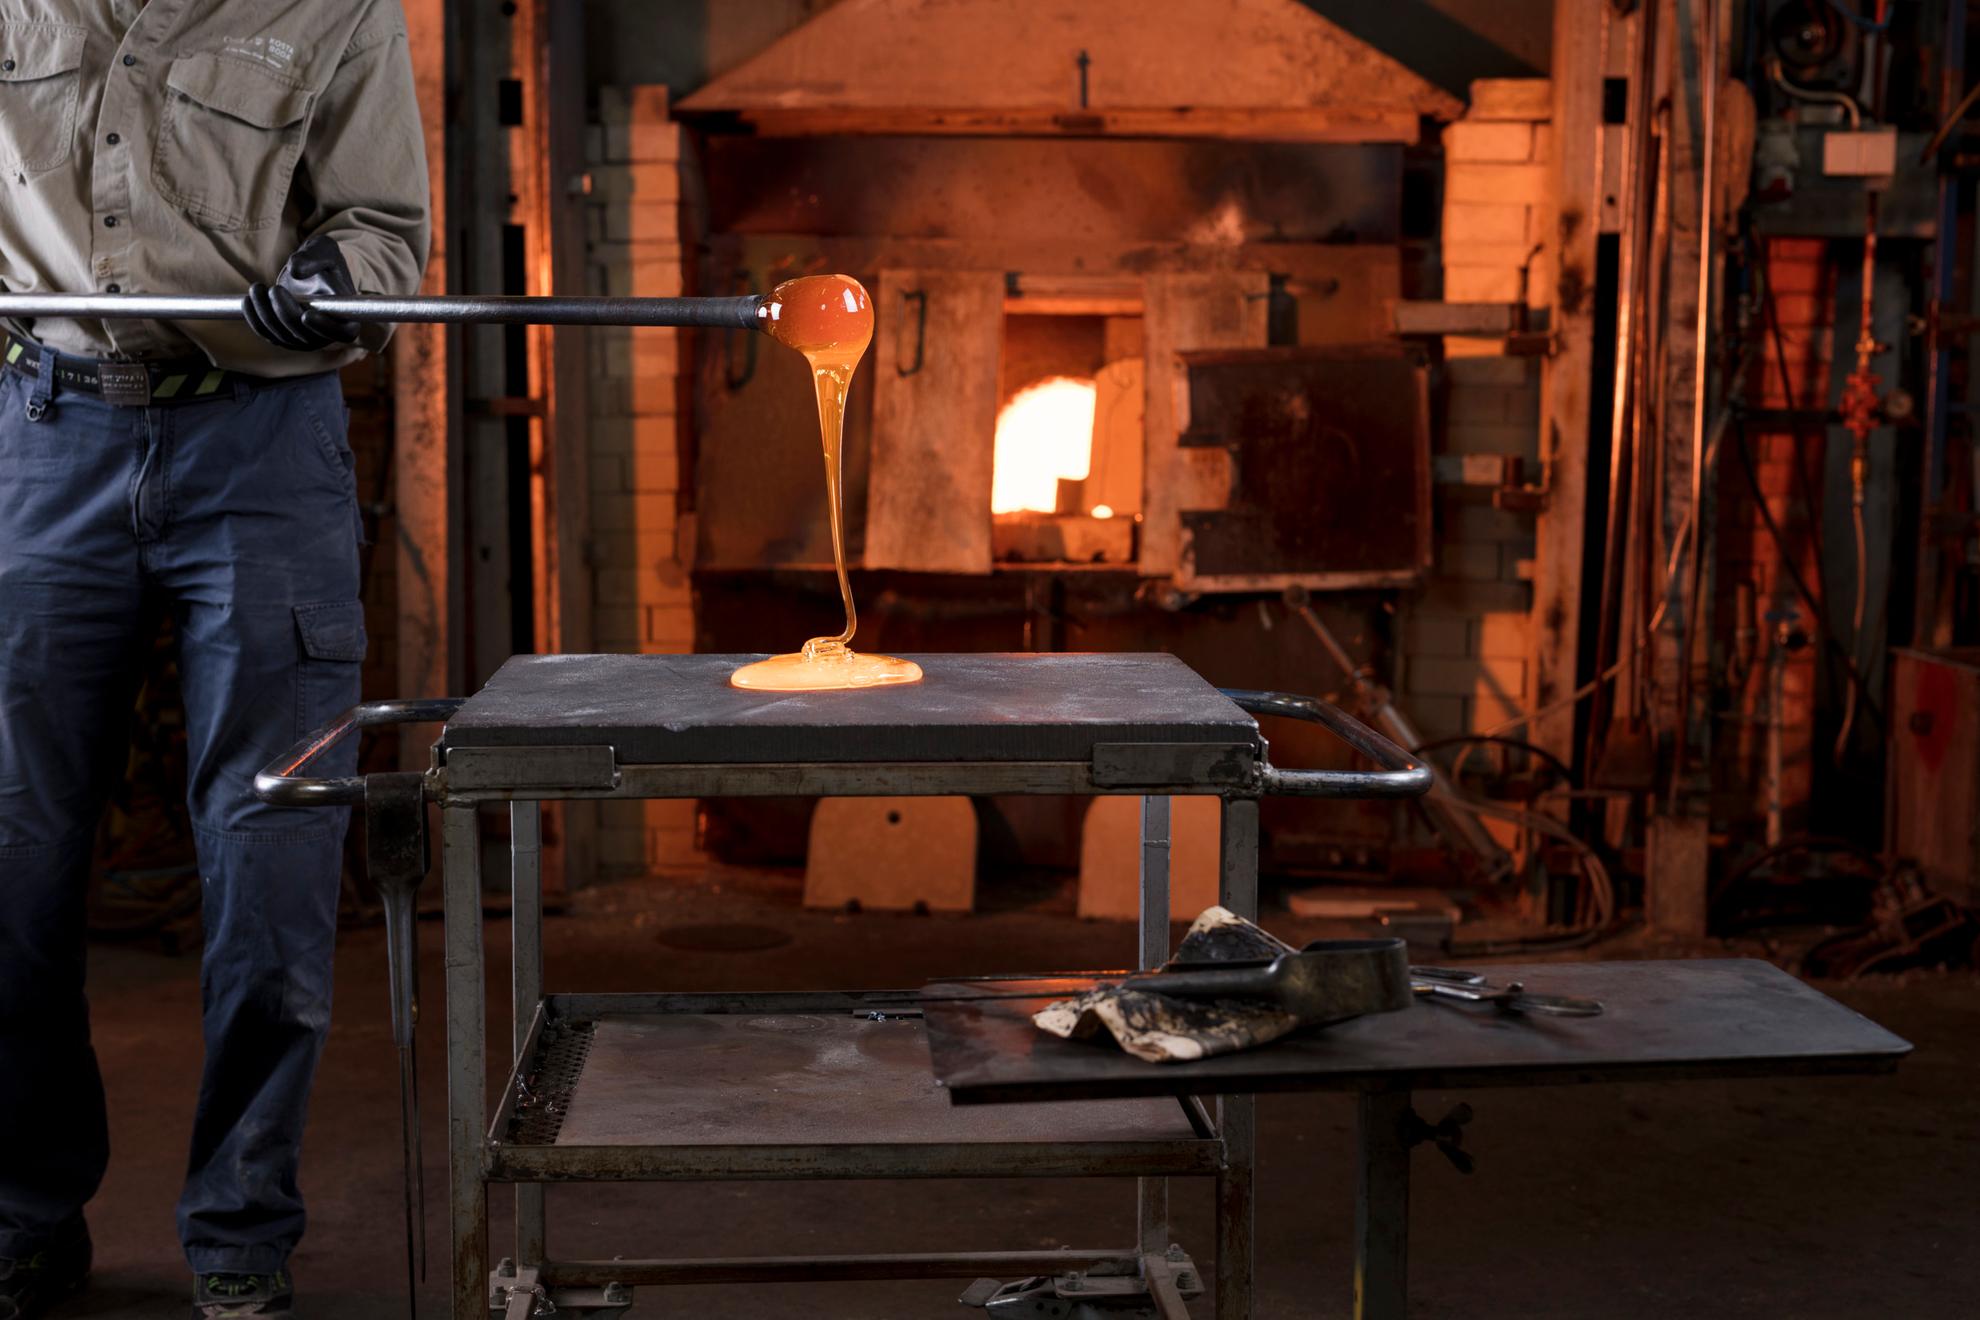 A person working with melted glass in front of a furnace.